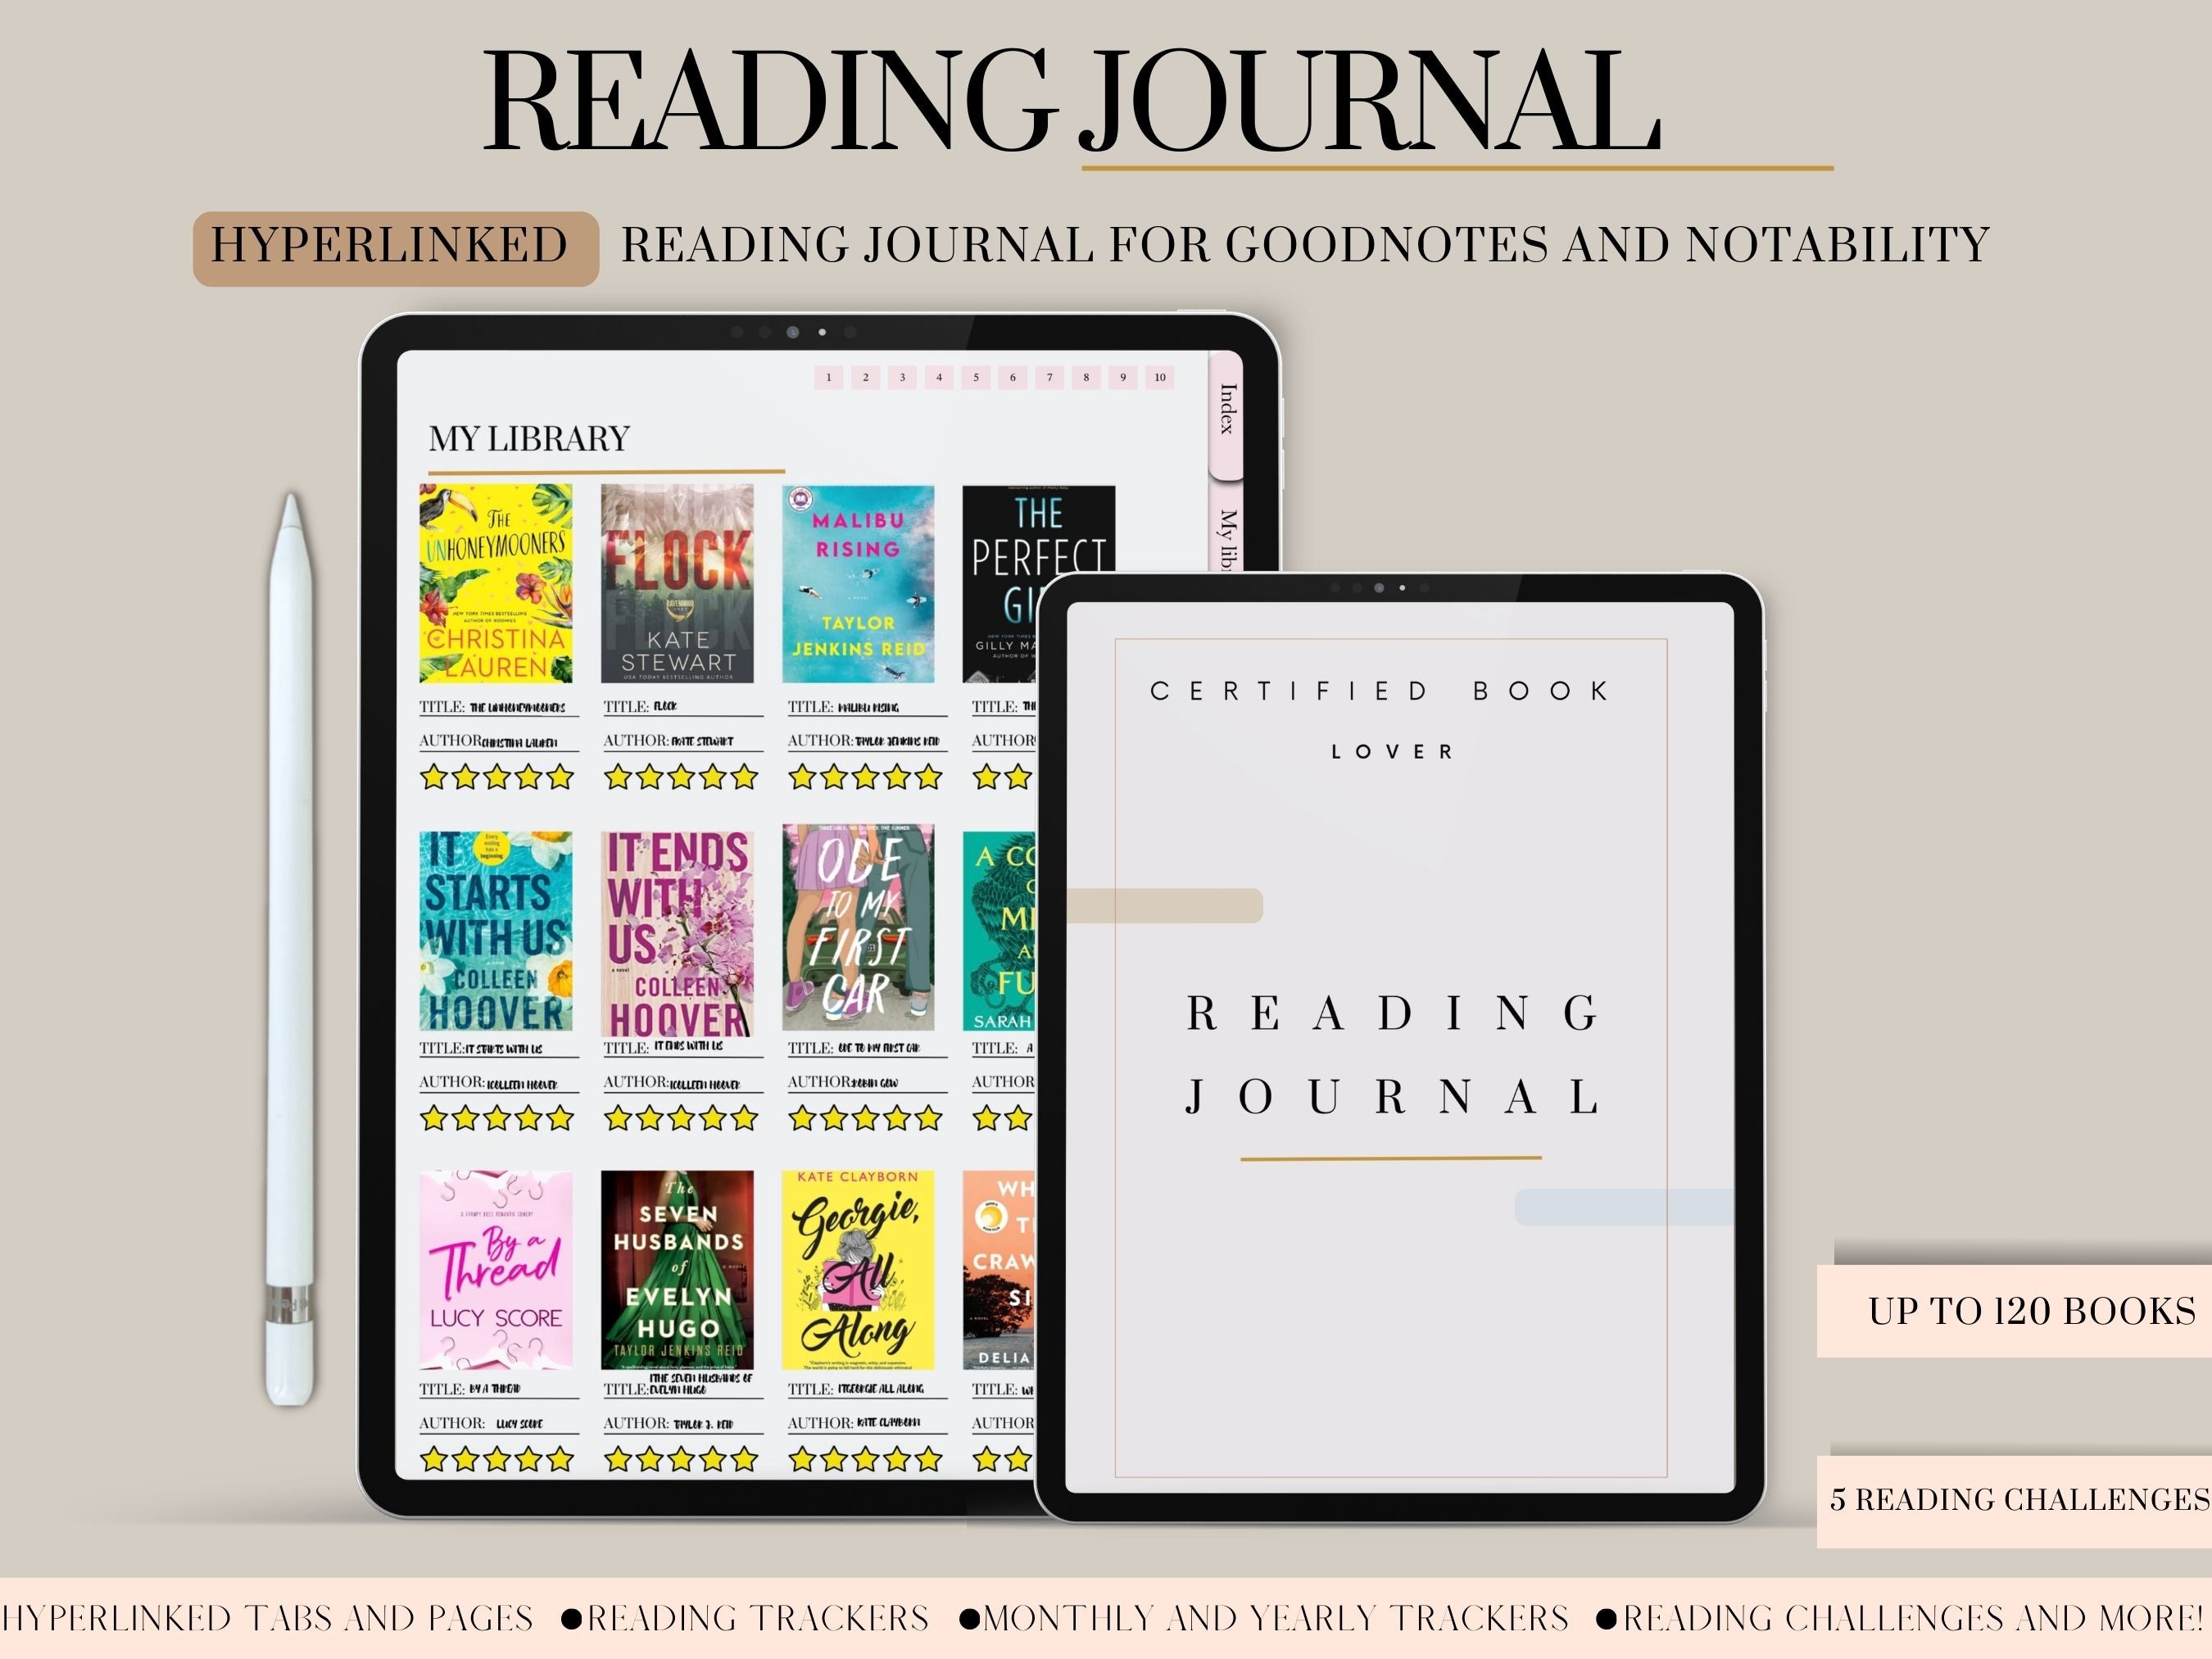 Reading Journal: A Log for Book Lovers and Bookworms - Book Review Journal  - Organized Book Tracker for Your 50 Favorite Books